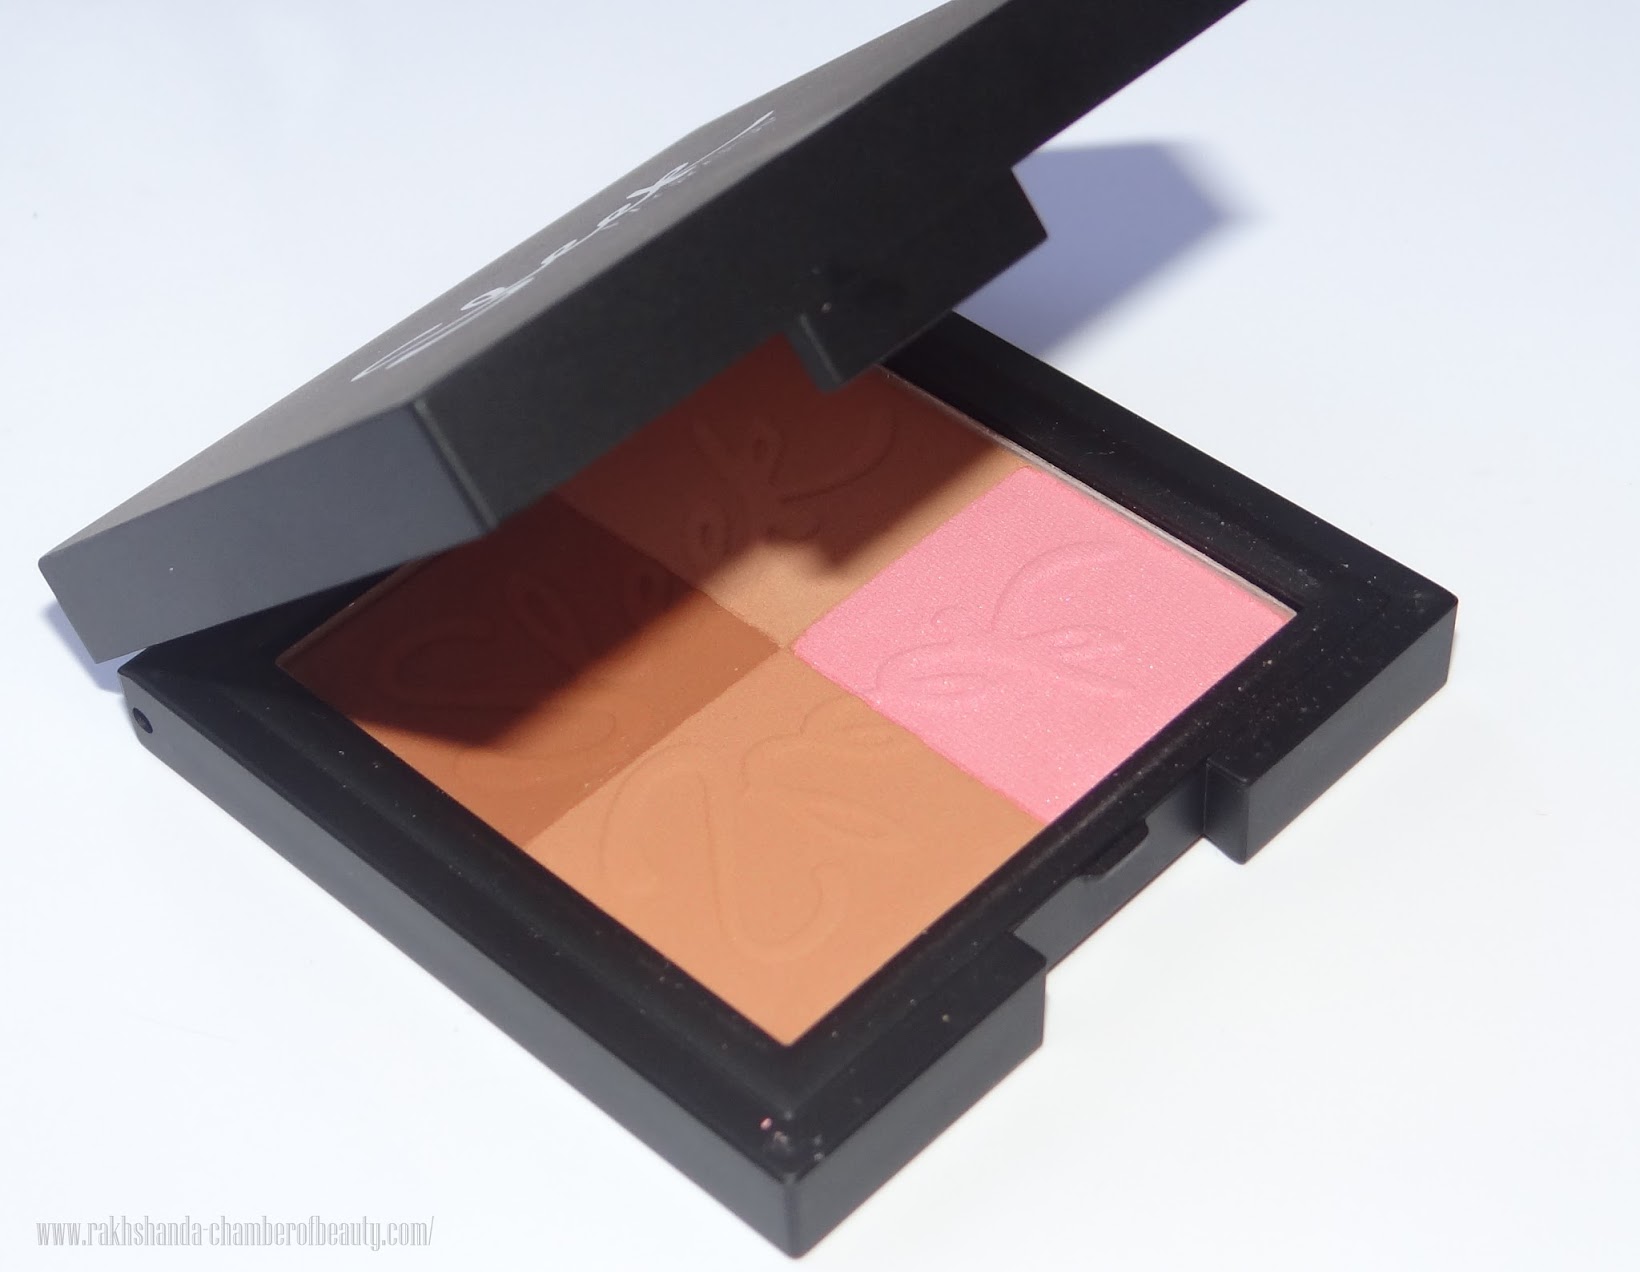 Sleek Makeup Bronze Block LIGHT Review, Photos & Swatches, best drugstore bronzer review & swatches, beauty and makeup, how to contour with Sleek Makeup Bronze Block, Indian beauty blogger, Chamber of Beauty